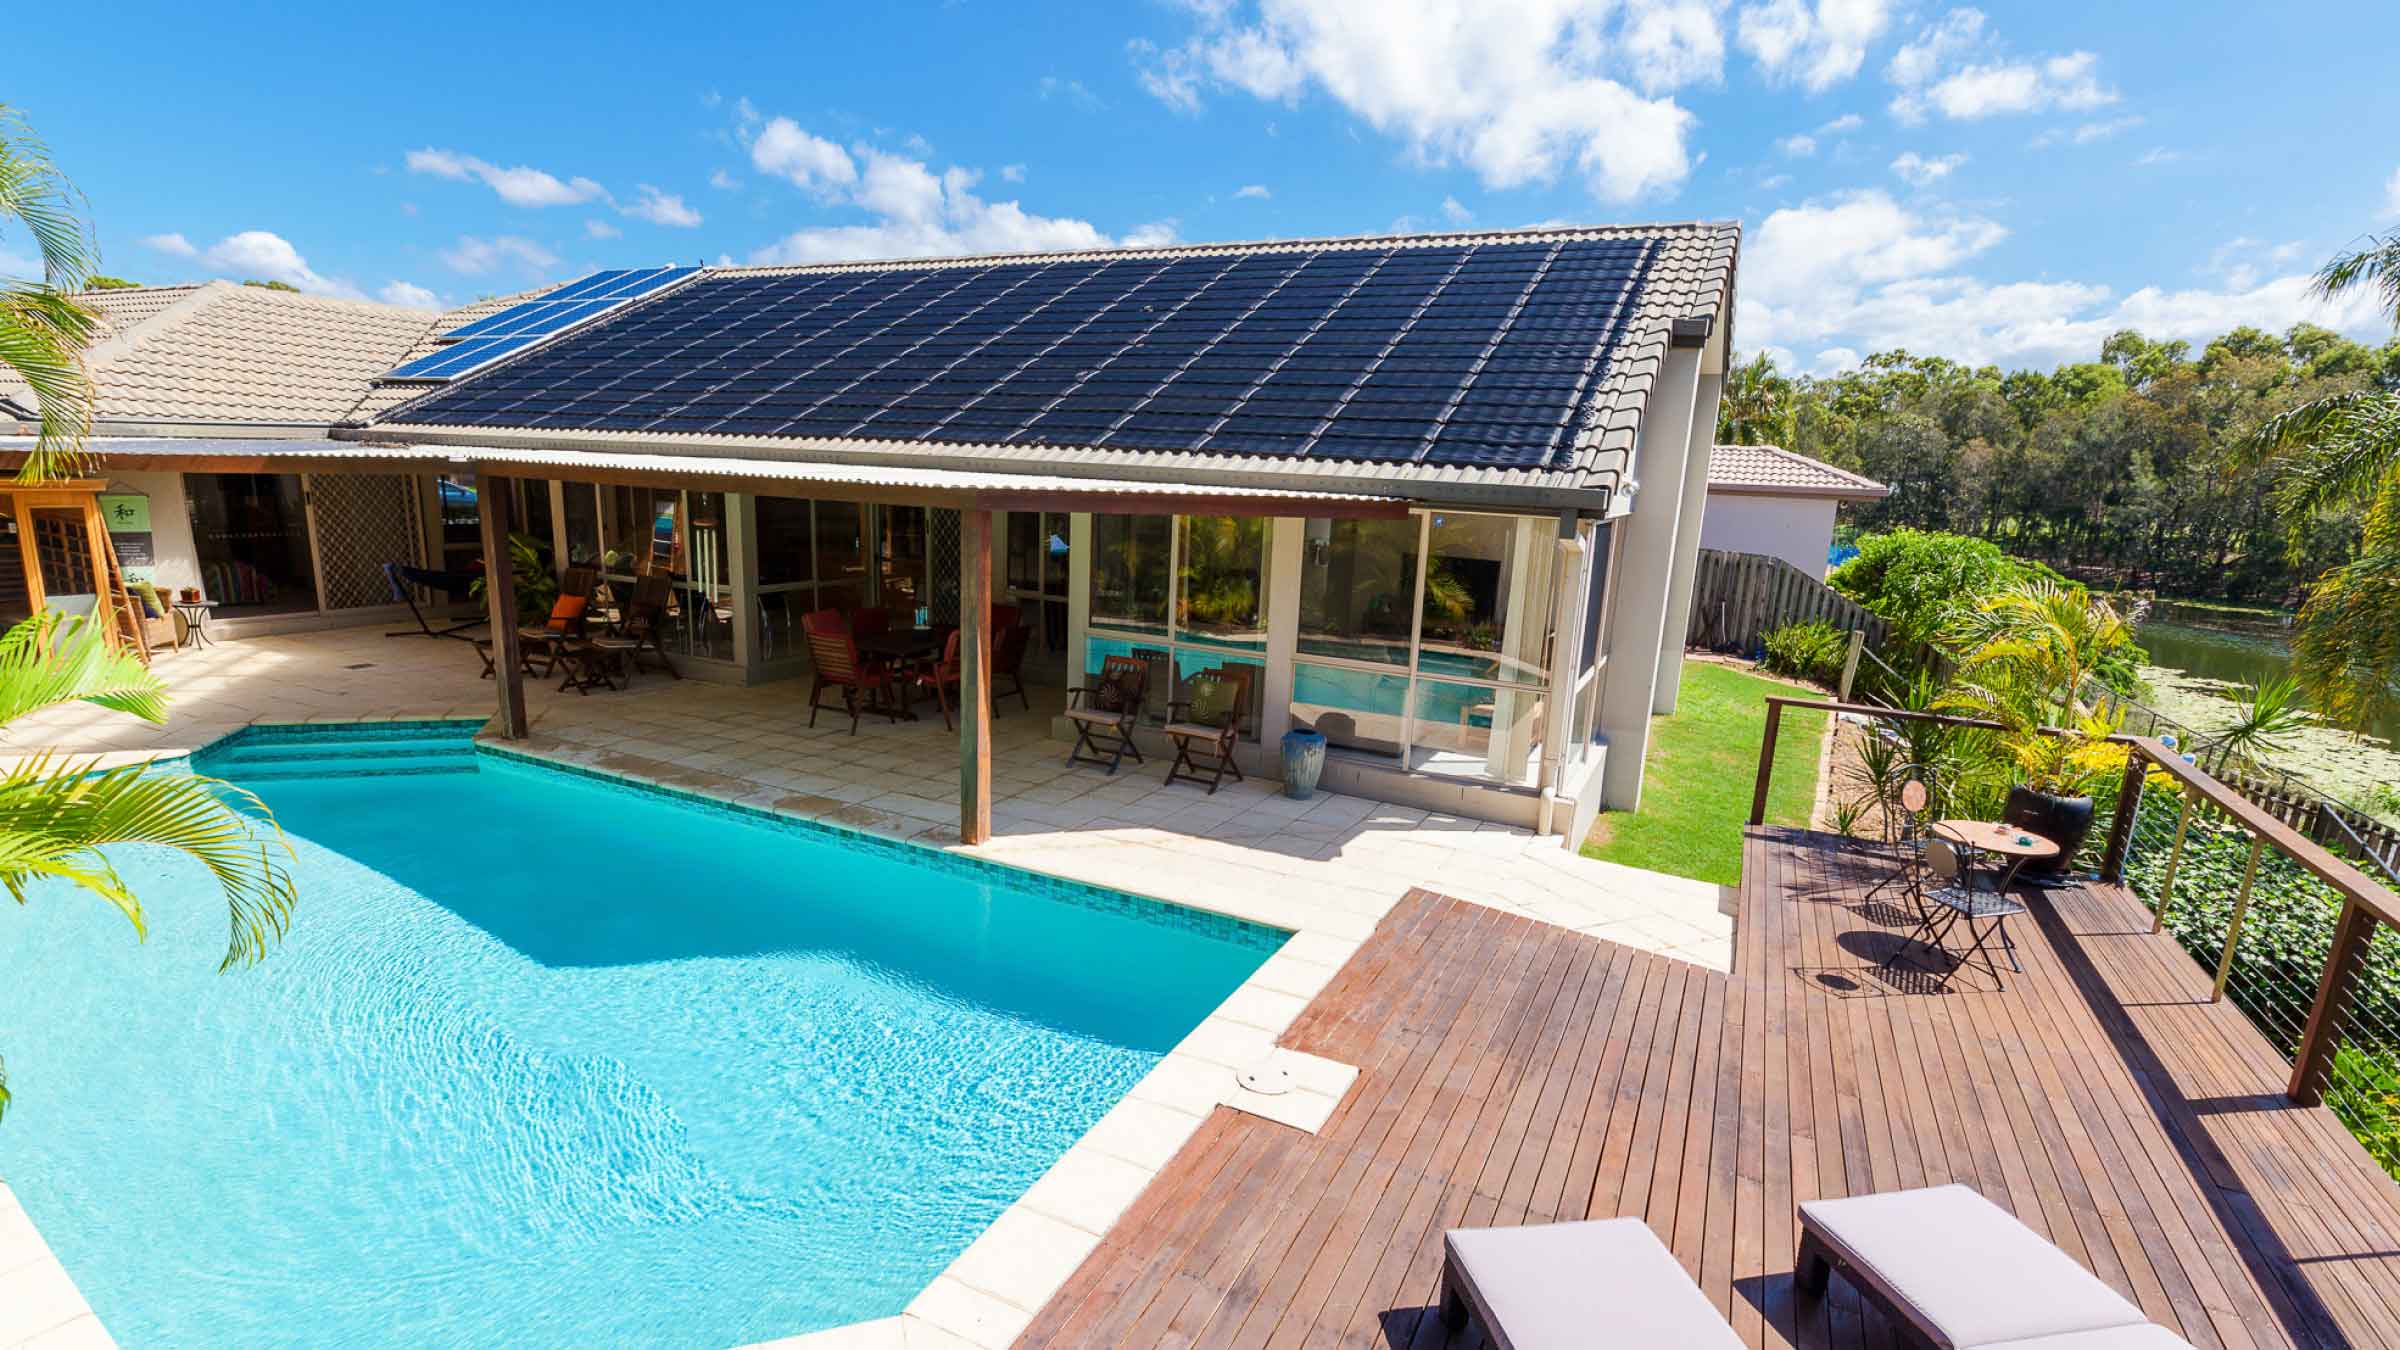 Solar tiles and panels on top of a modern bungalow, overlooking a pool with neat decking and manicured lawn.